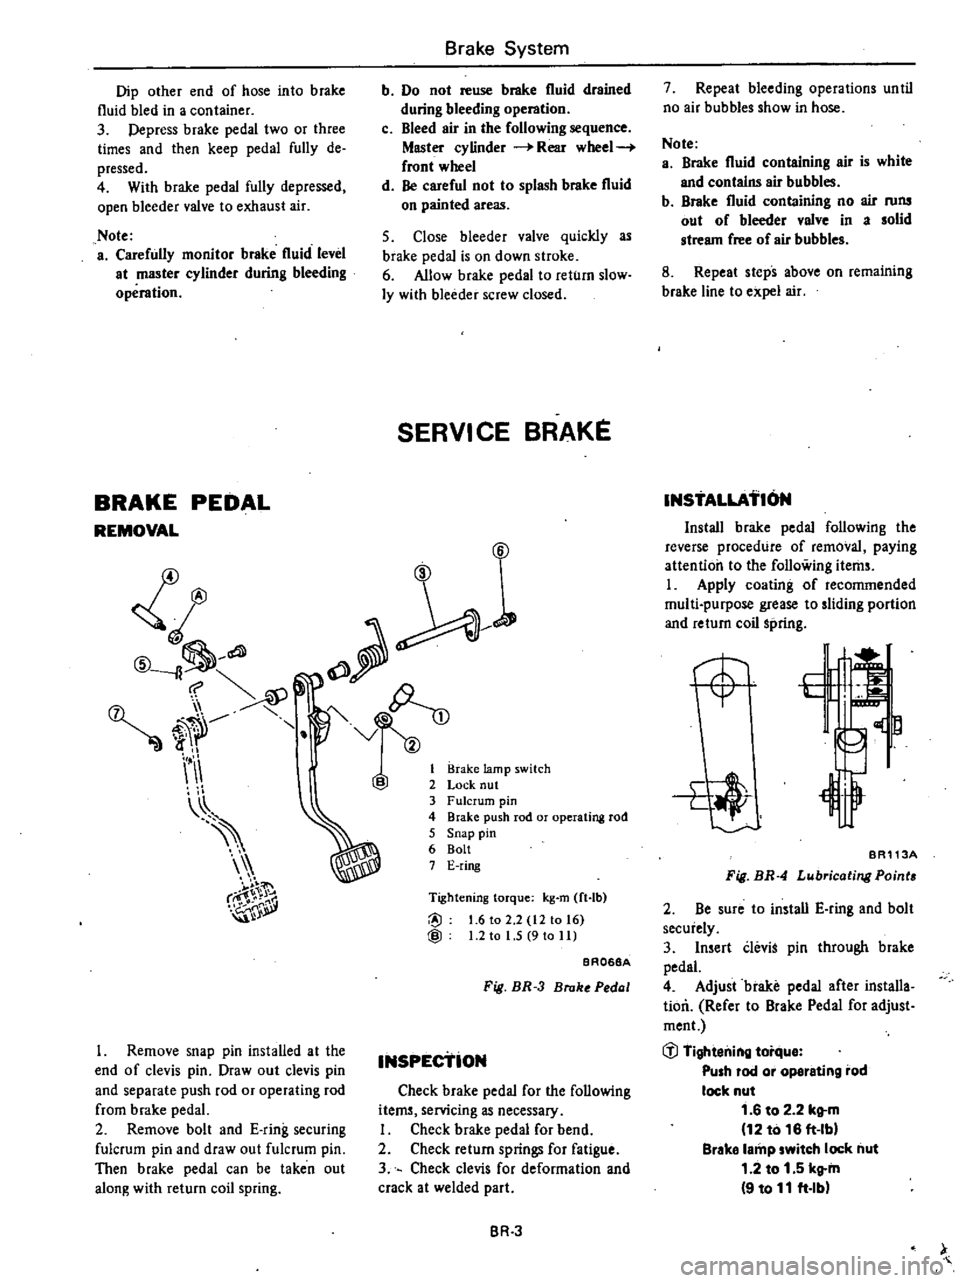 DATSUN 210 1979  Service Manual 
L

@
fl 
JJ

l

f
m

ff 
v 
1

II 
2

I

I 
II

B

s1

r
Dip 
other 
end

of 
hose 
into 
brake

fluid 
bled 
in

a 
container

3

Pepress 
brake

pedal 
two 
or 
three

times 
and 
then

keep 
pedal